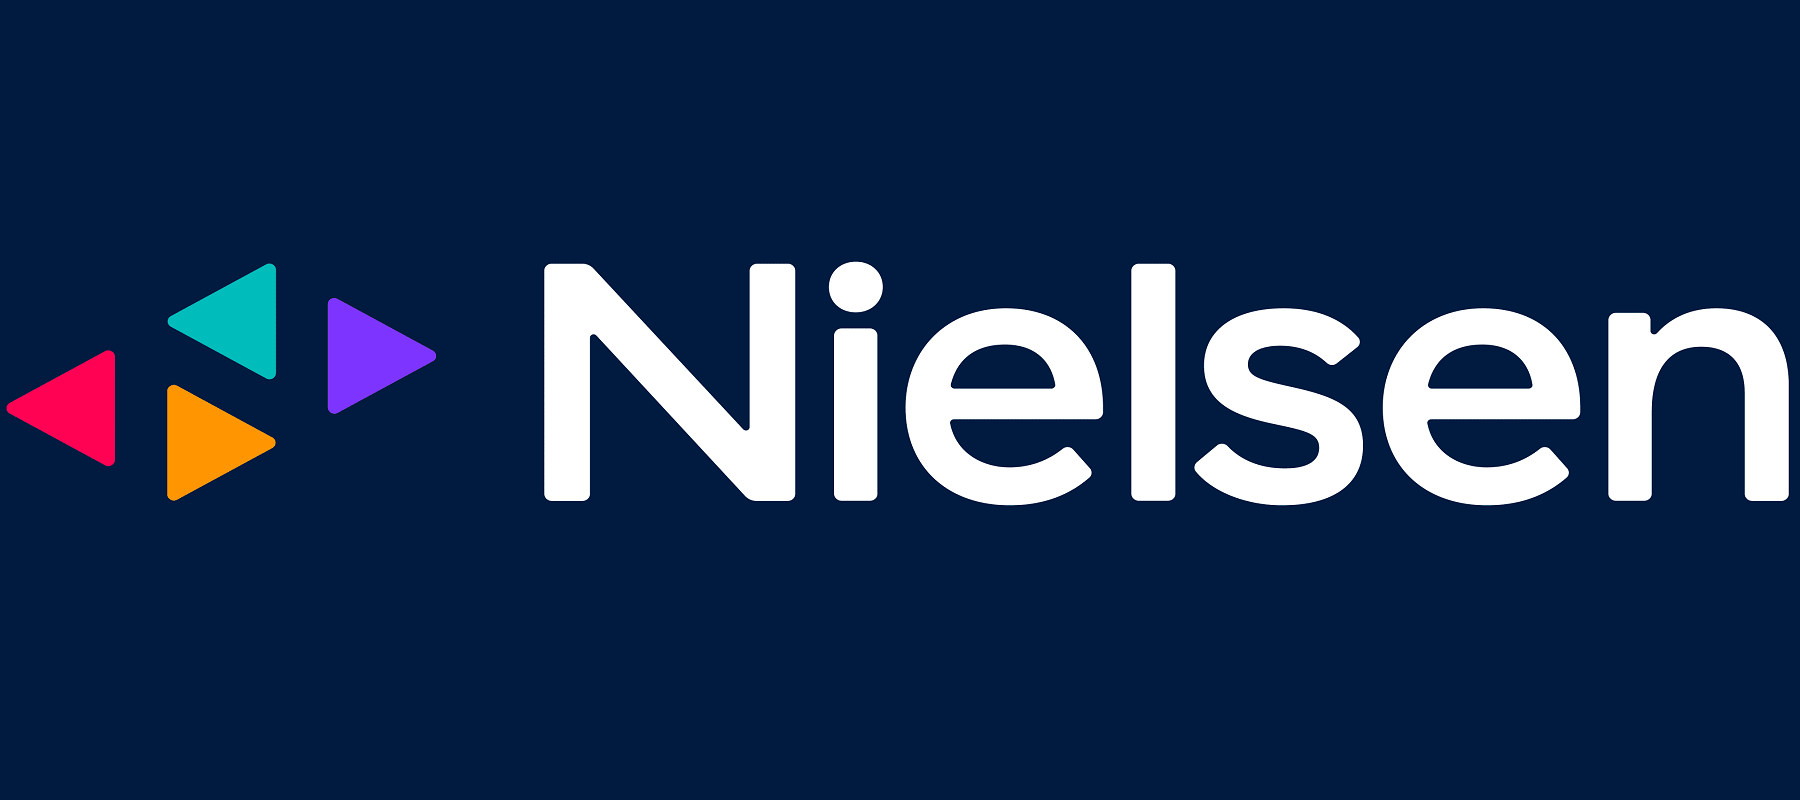 Nielsen renews data license deal with media company Comcast